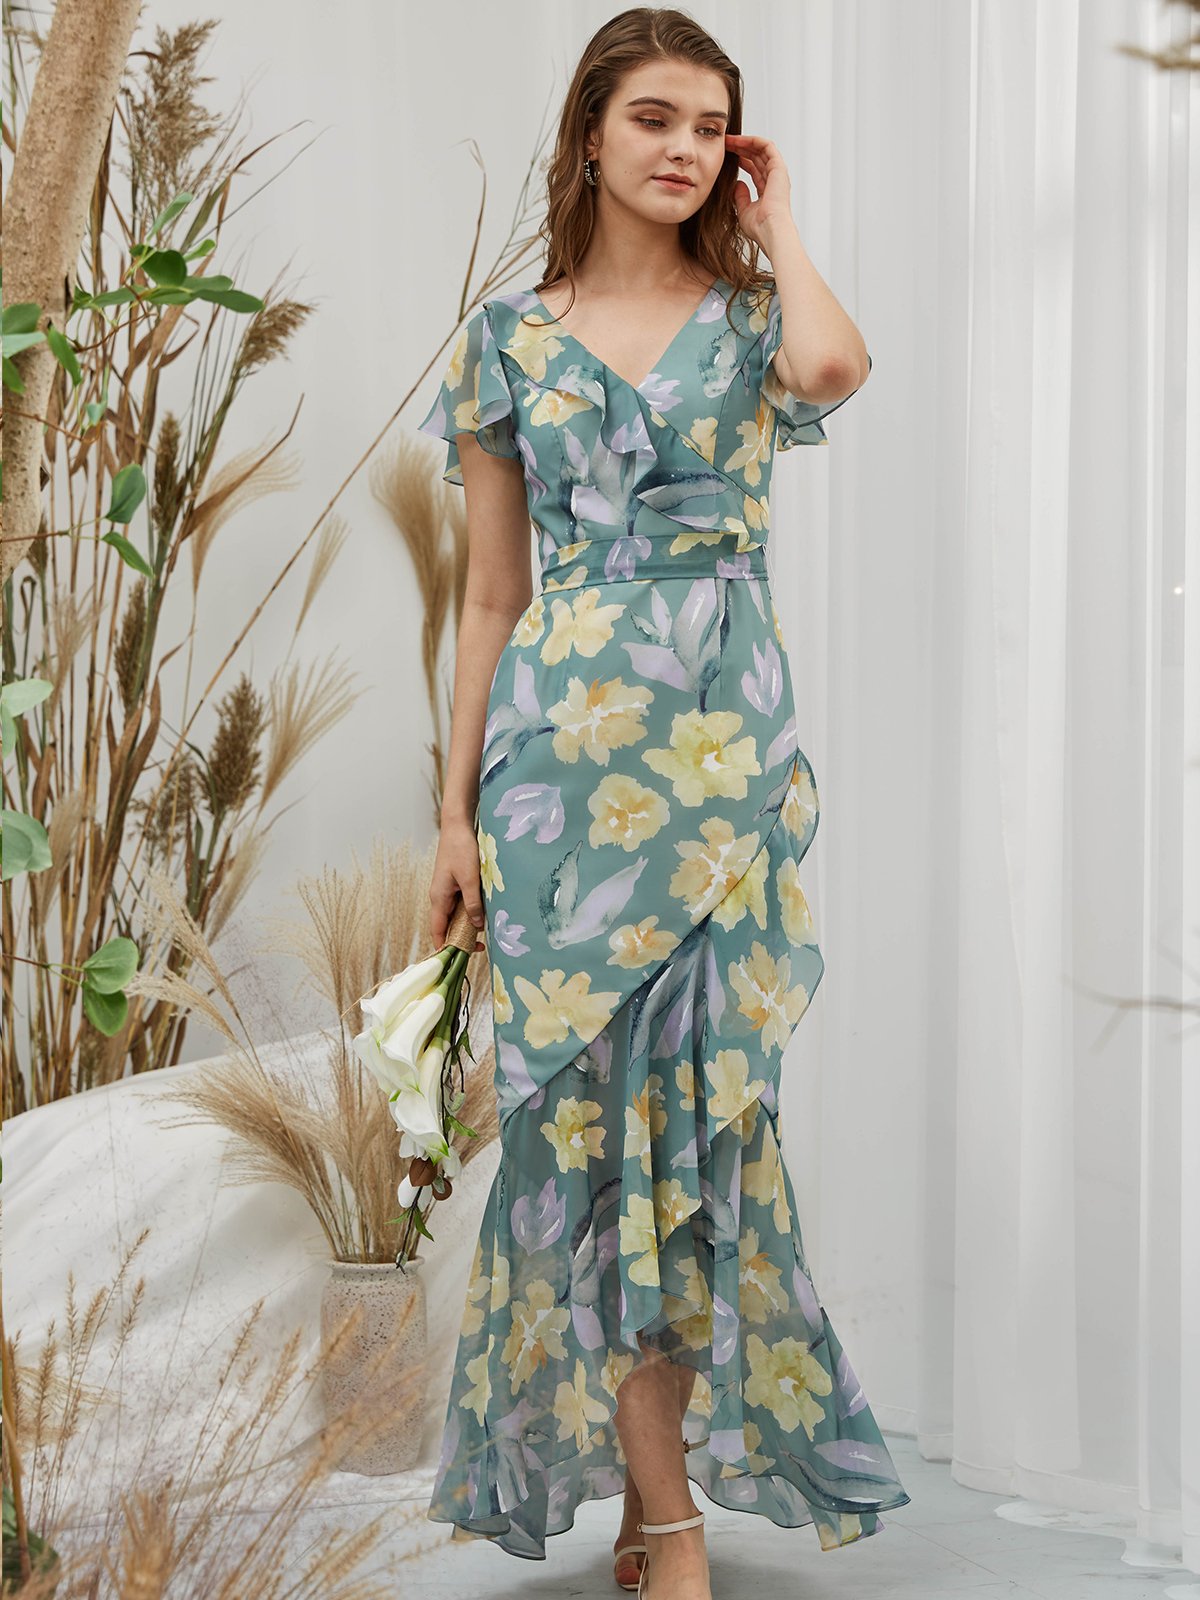 Cape Sleeves Chiffon Print Floral Sage Floor Length Formal Evening Gown